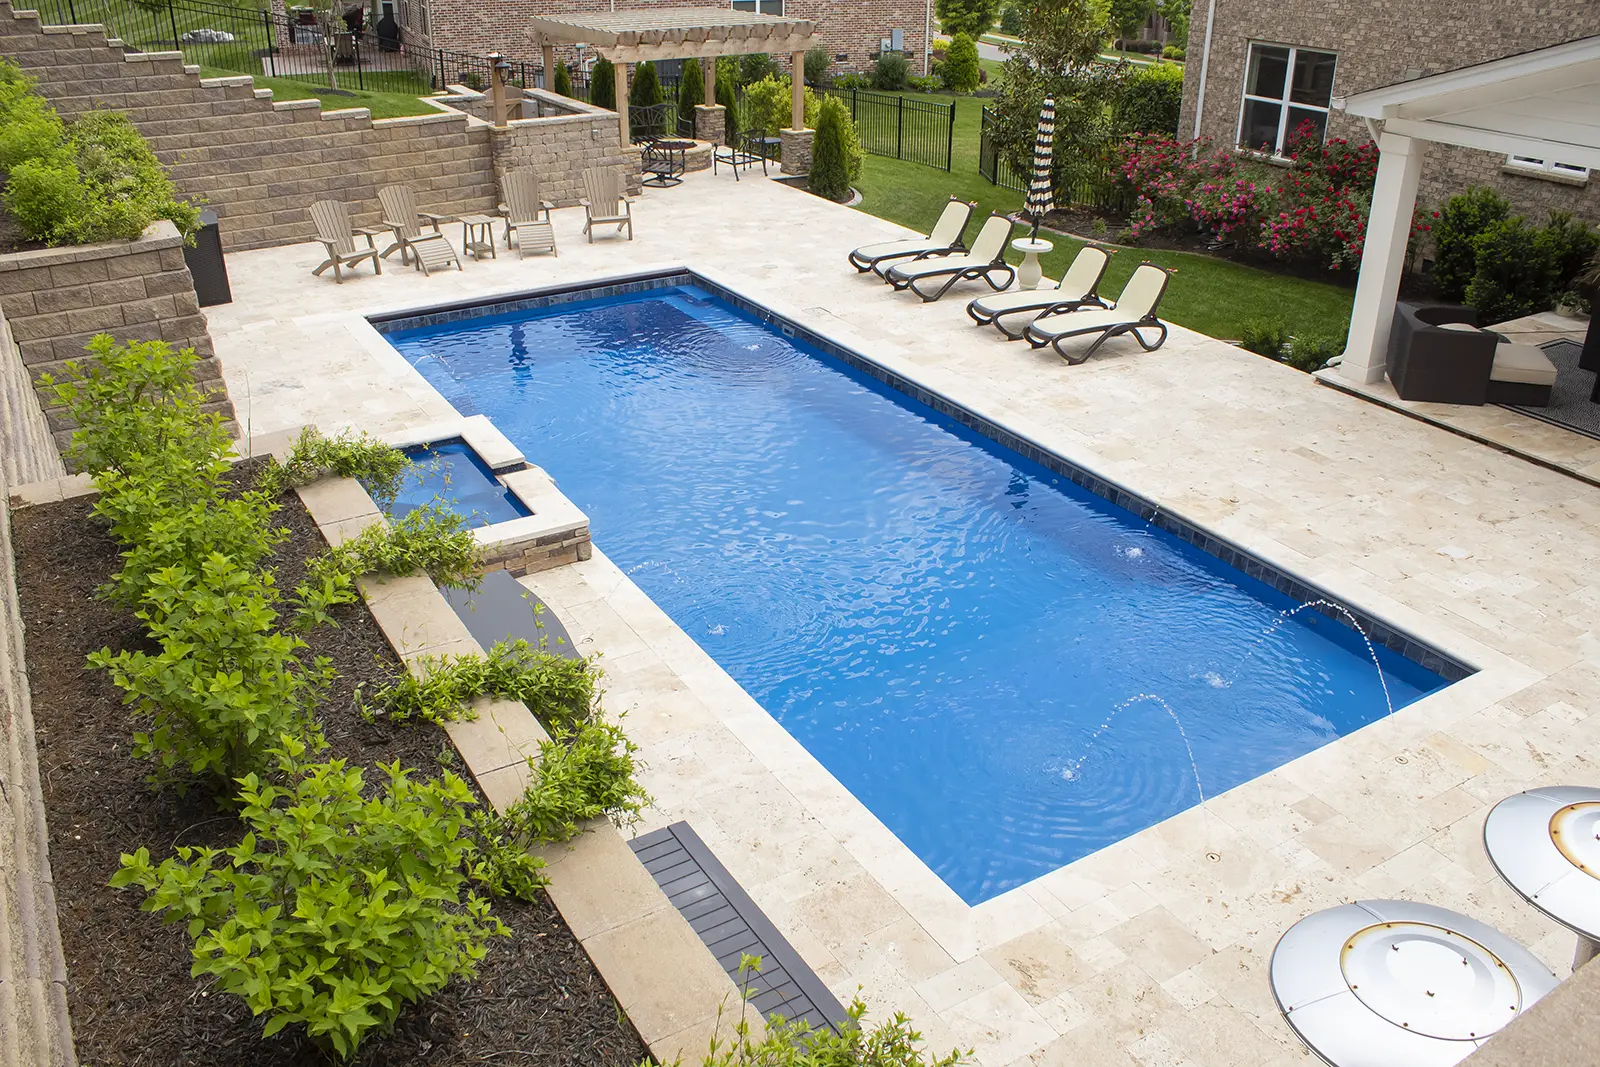 The Leisure Pools Pinnacle™ - let us install your pool in Vancouver, CA